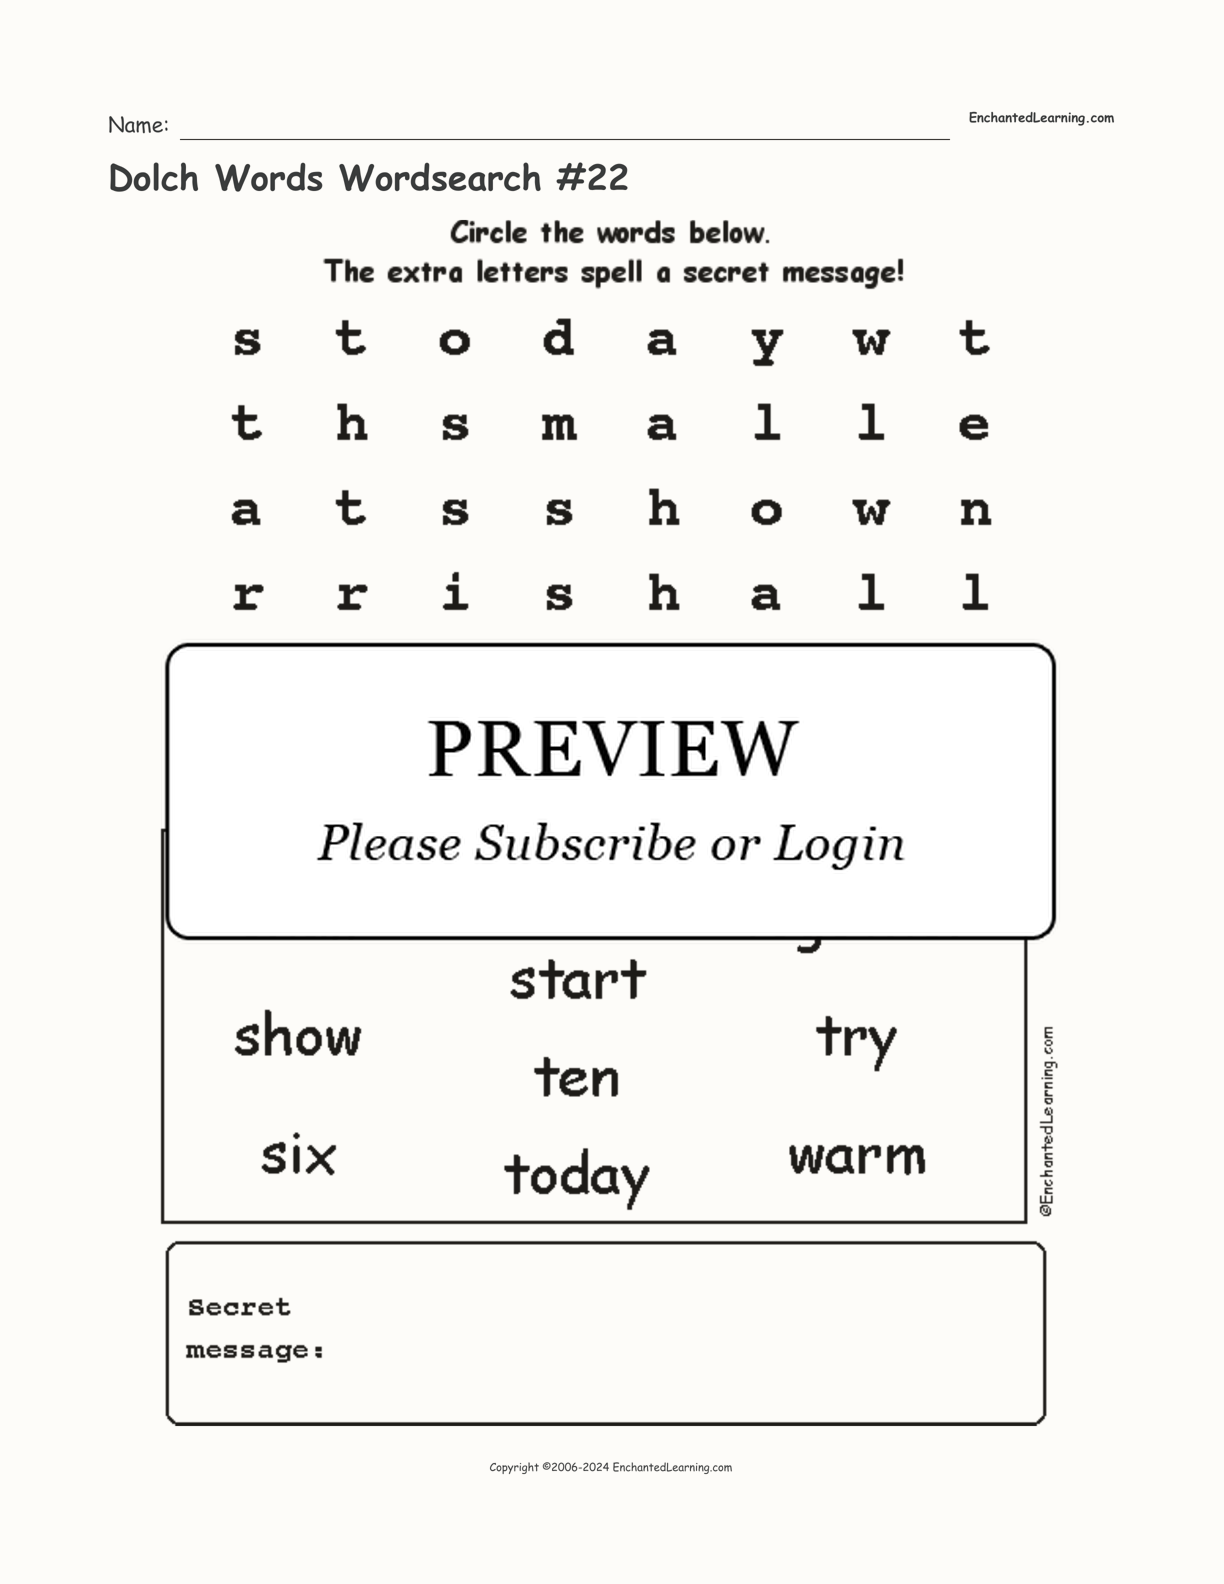 Dolch Words Wordsearch #22 interactive worksheet page 1